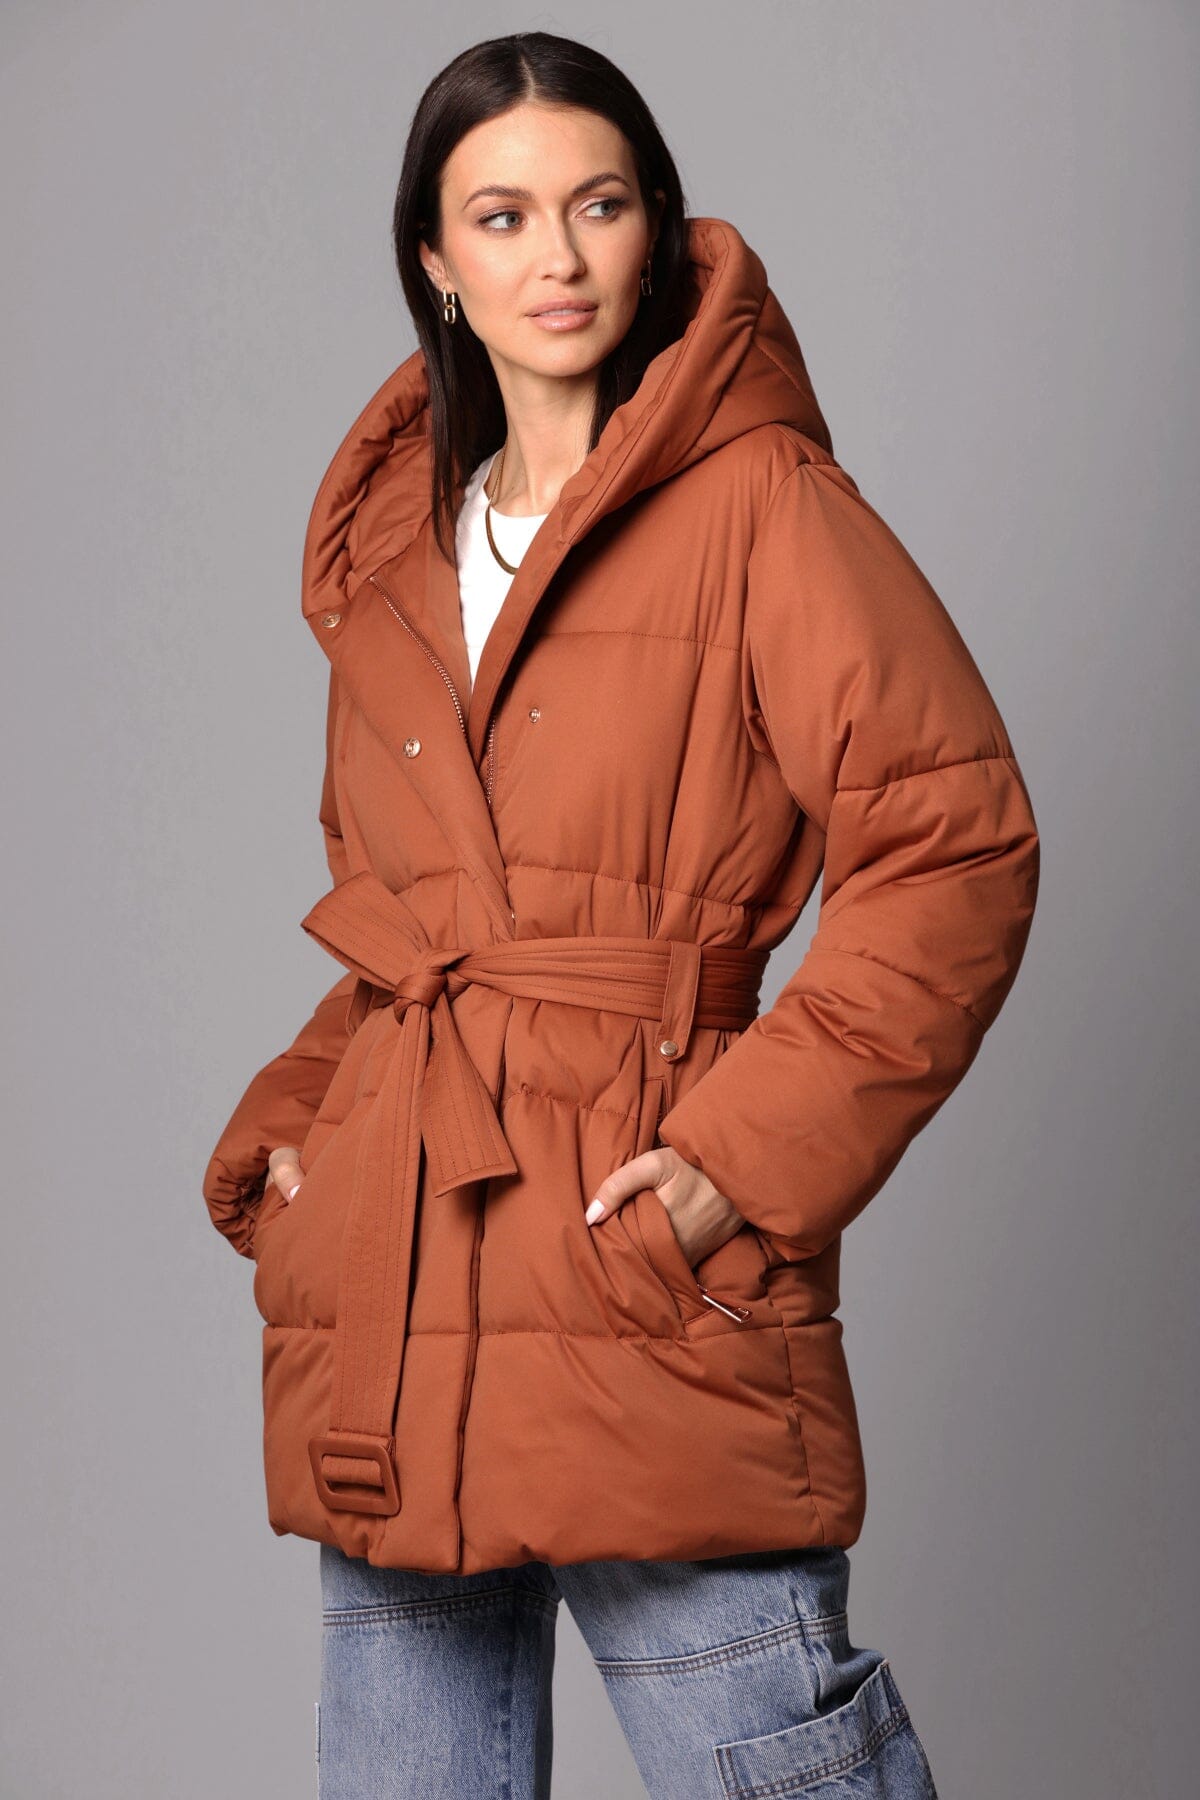 star quilted thermal puff wrap puffer coat jacket cedar brown - women's figure flattering designer fashion cute fall 2023 coats jackets outerwear